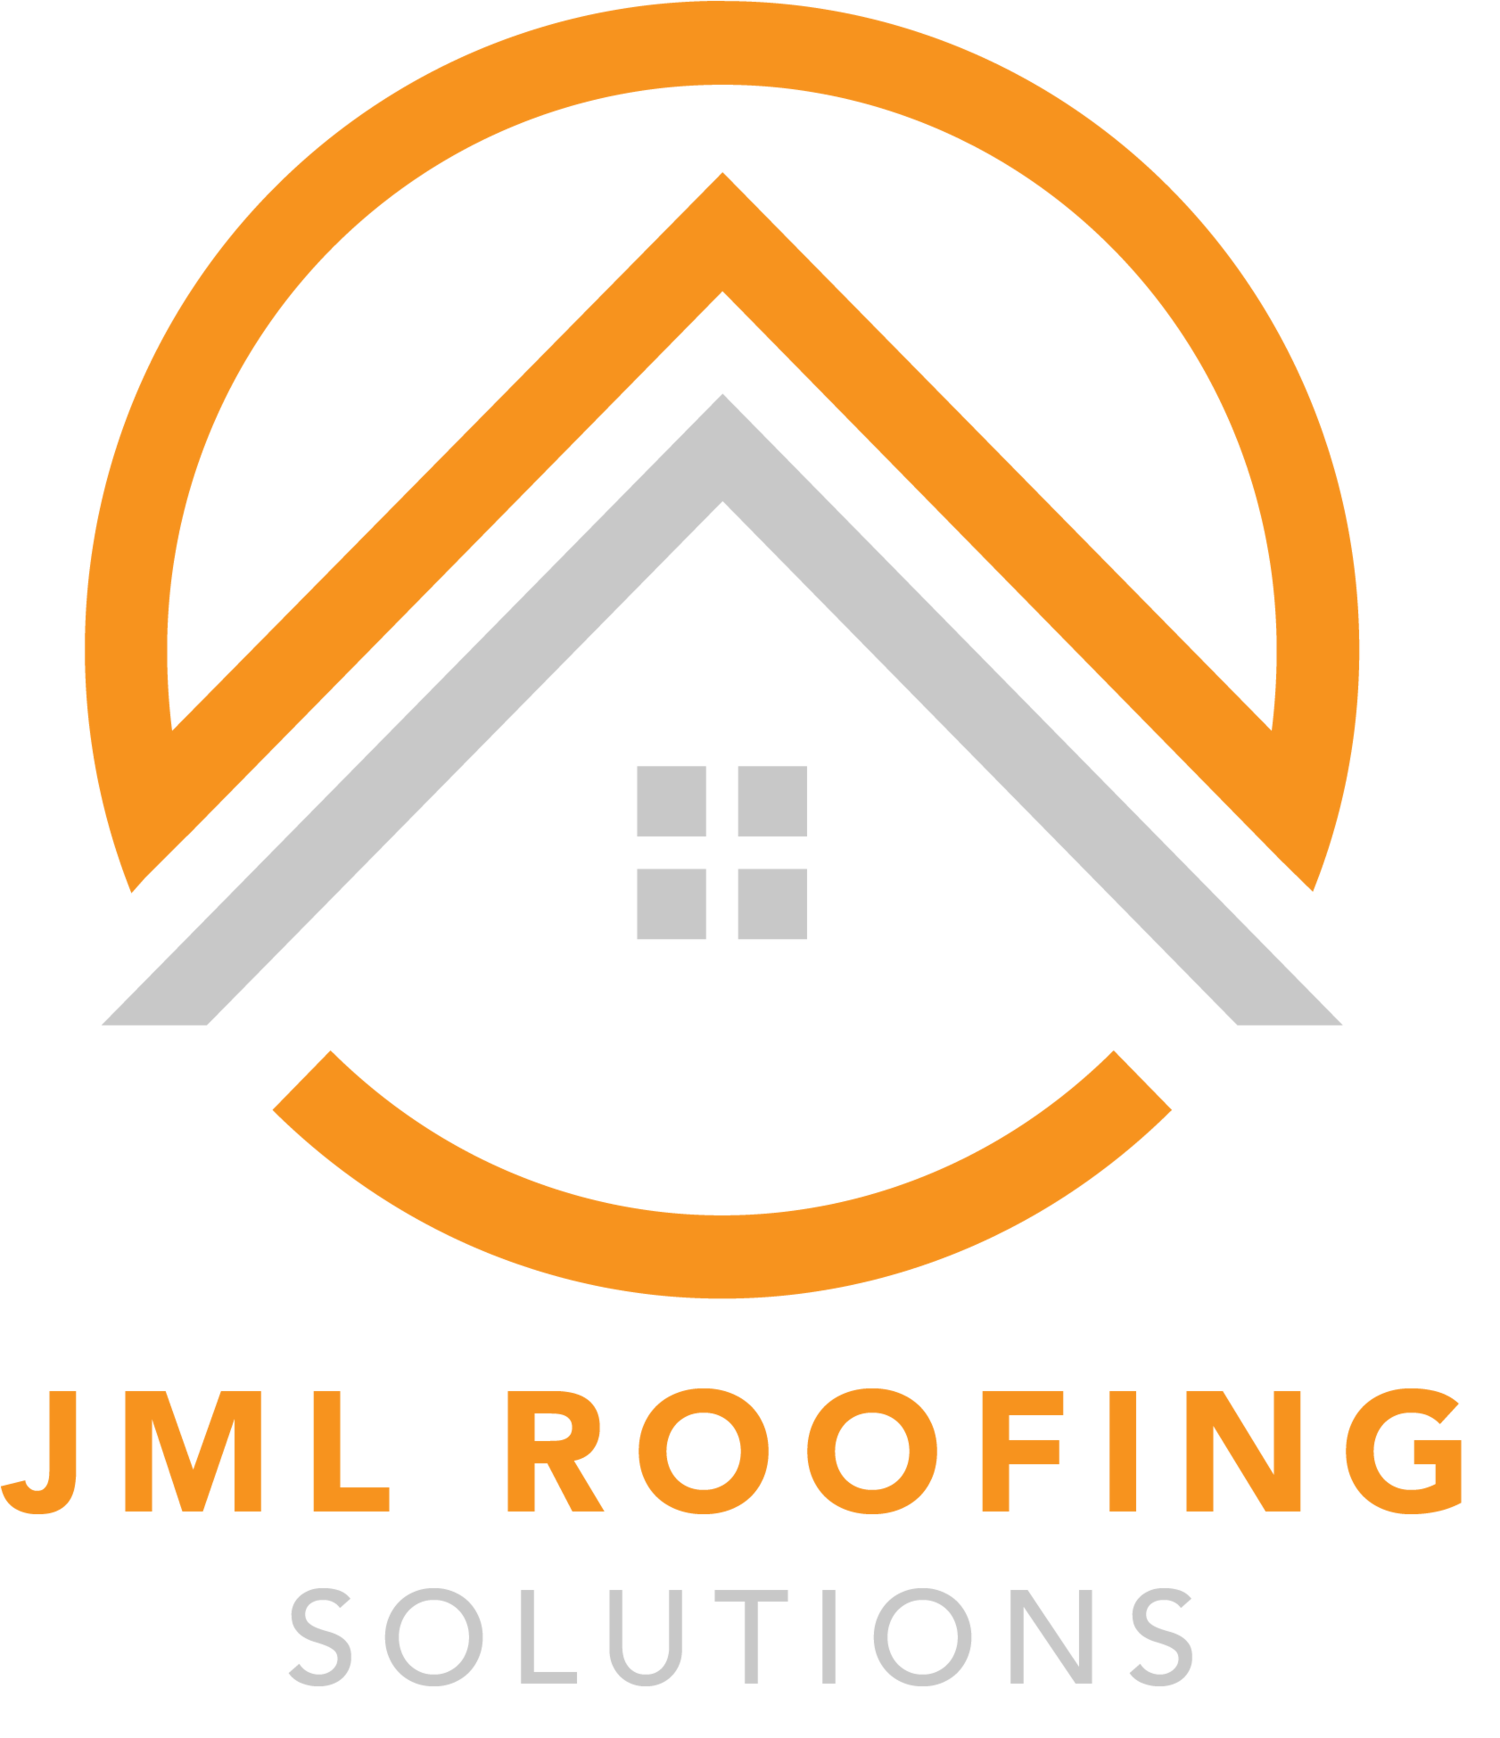 JML Roofing Solutions